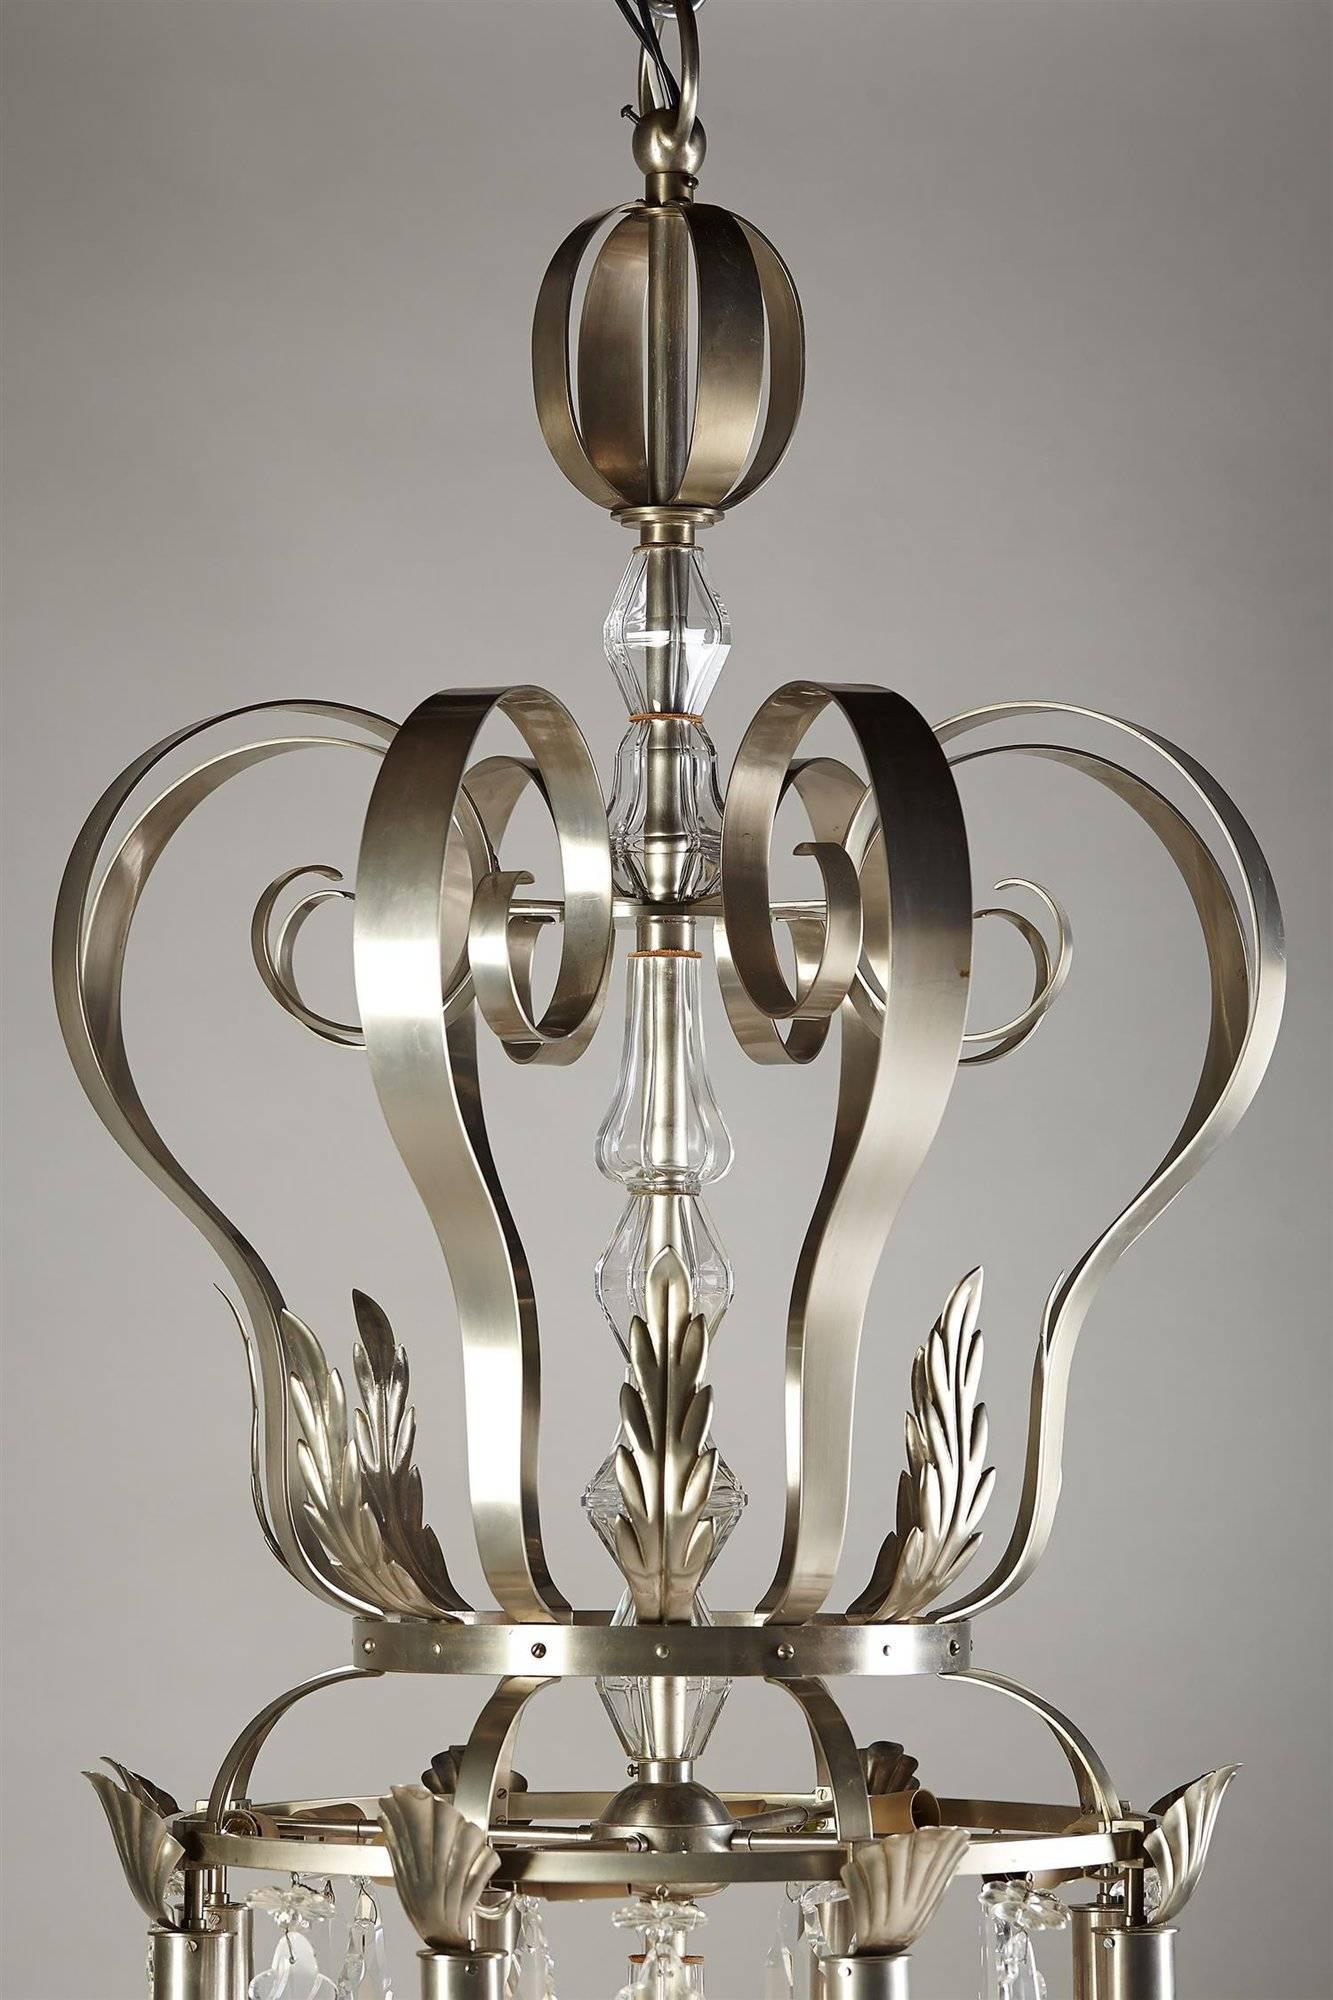 Monumental ceiling lamp, designed by Otar Hökerberg, Sweden, 1930-1931.
Designed by Otar Hökerberg, Sweden, 1930-1931.

Unique.

Provenance: This chandelier was specially designed for Hökerberg's interior at Cardellgatan 1, Stockholm.

Glass